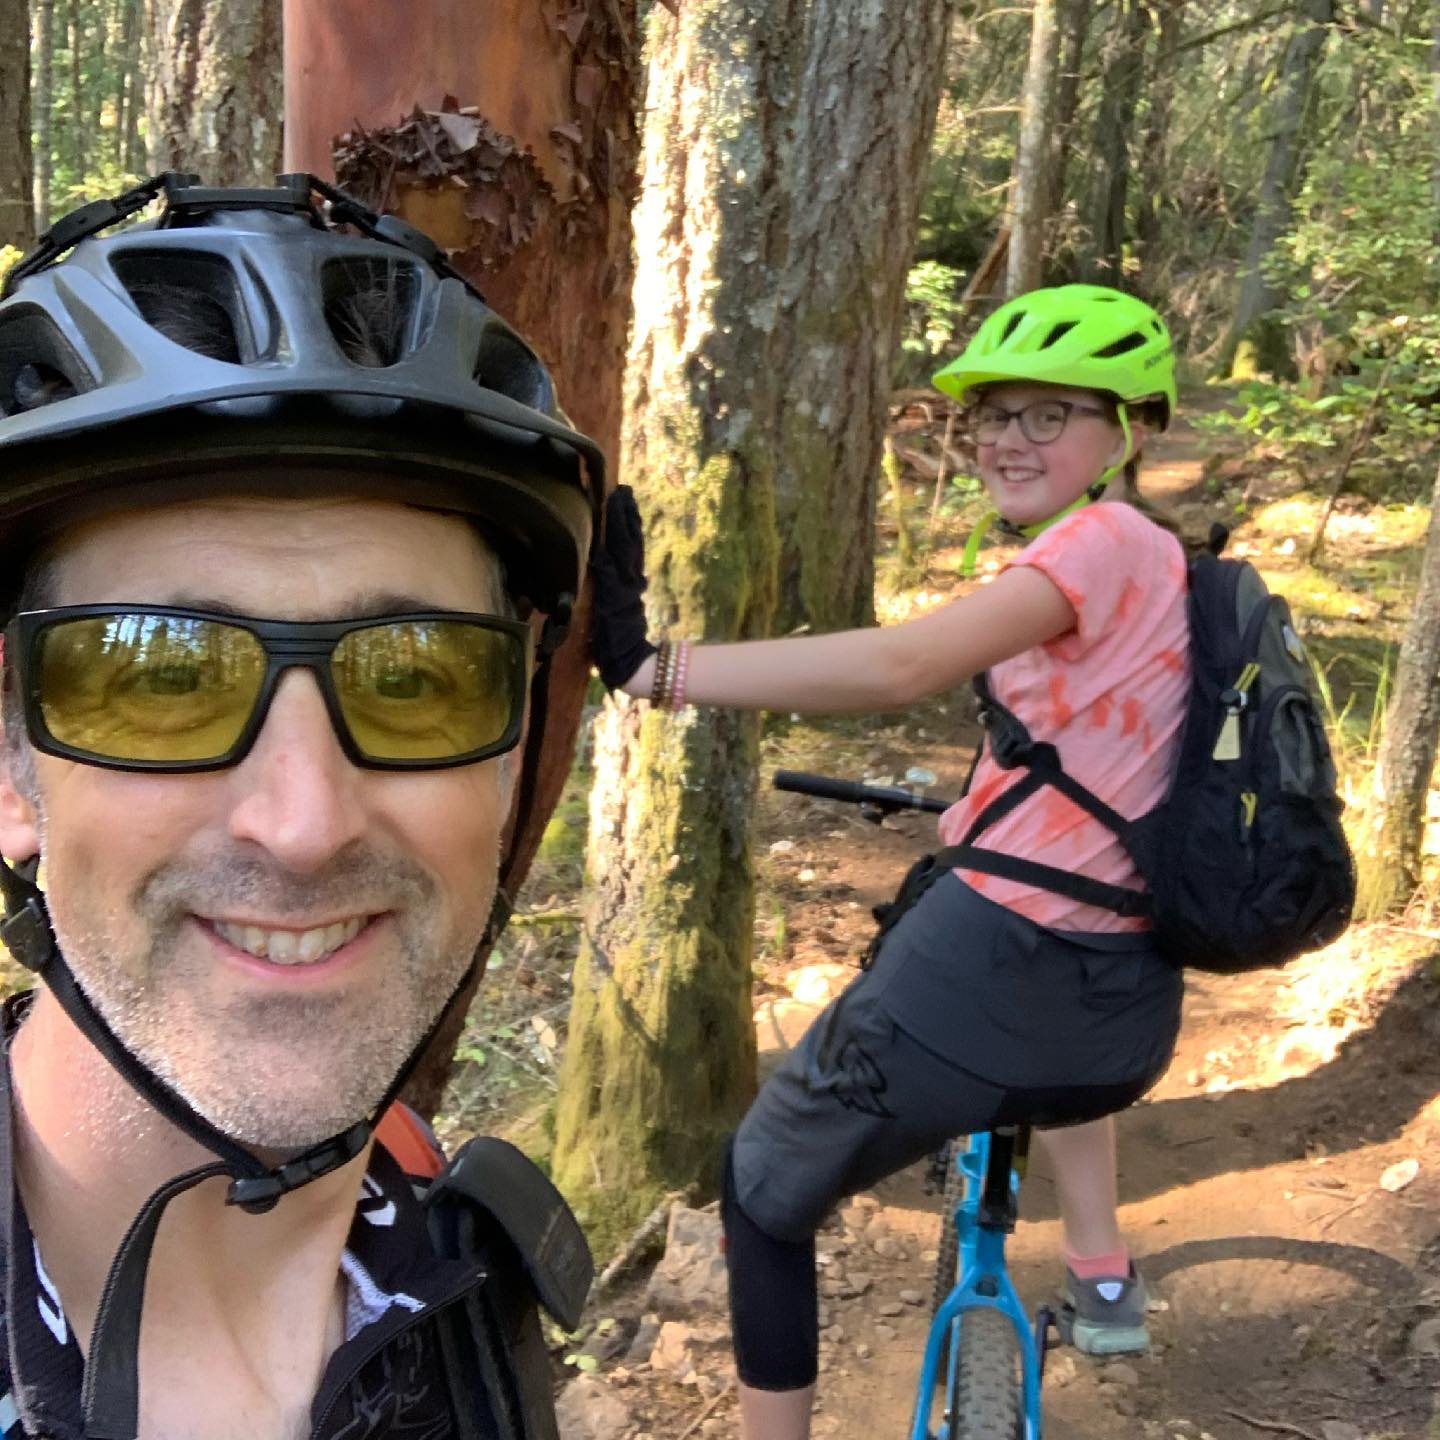 Monday Amy and I headed out for a rip at the dump. Up Skull, over to Sofa King, them back to Skull. Great loop for Amy’s newfound skills. #mtbvi #yyj #mountainbiking #bikesarefun